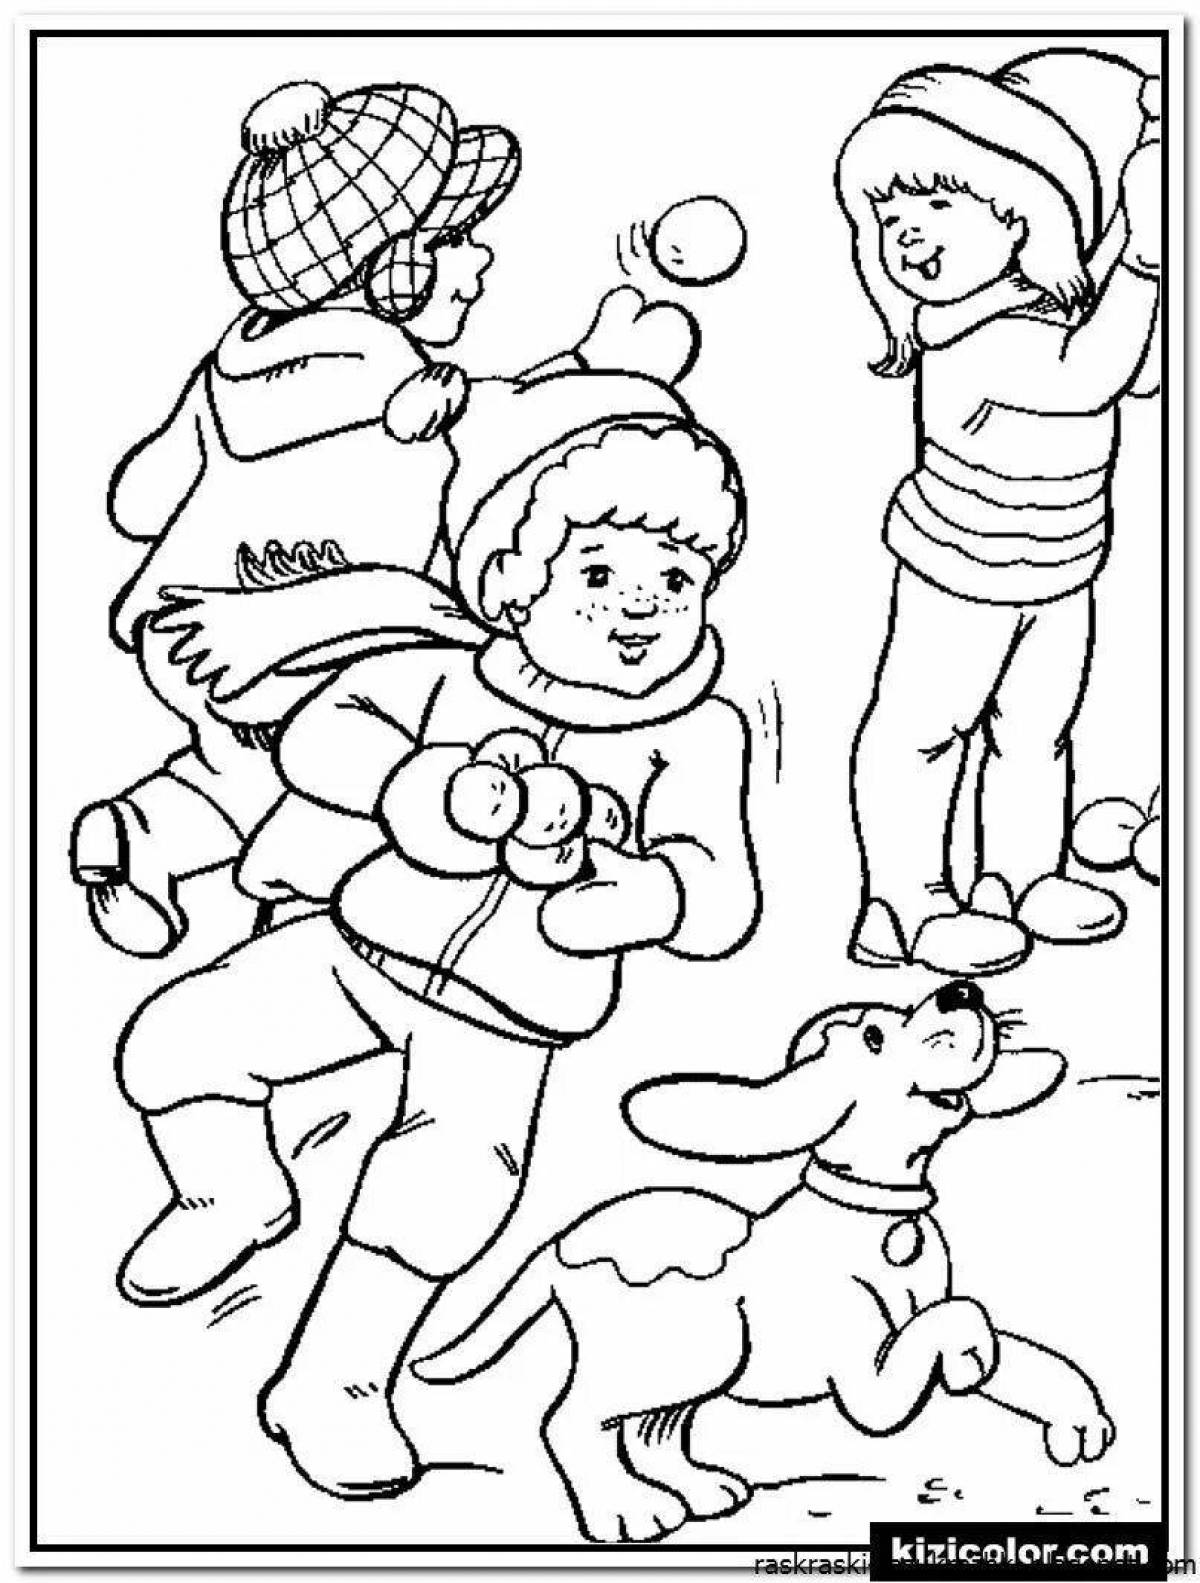 Exciting snowball game coloring book